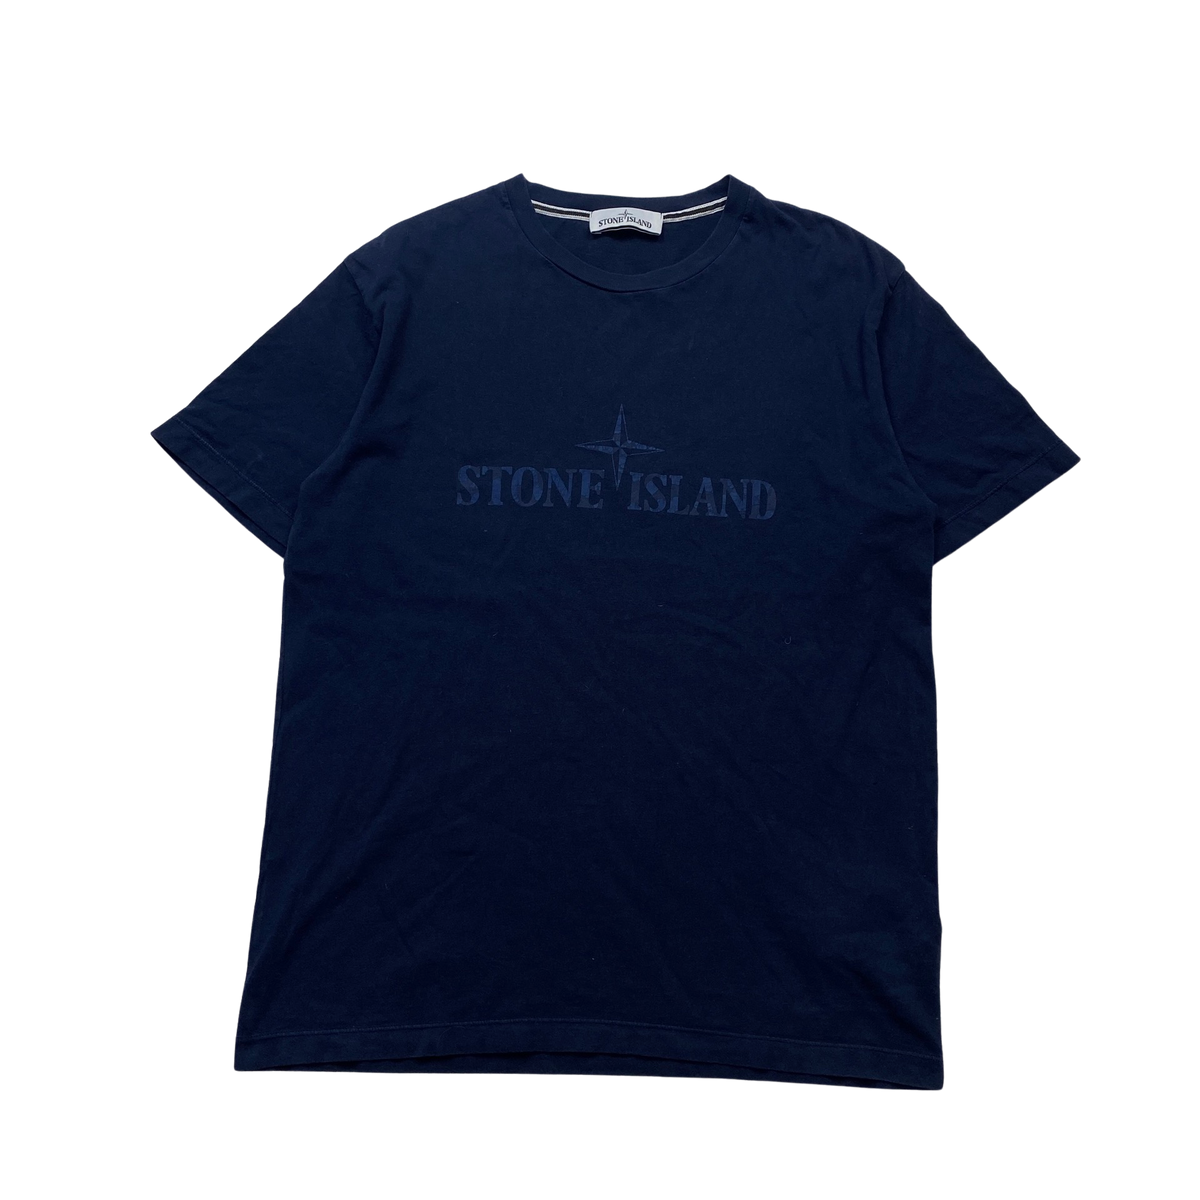 Stone Island Navy Spellout T Shirt - Large